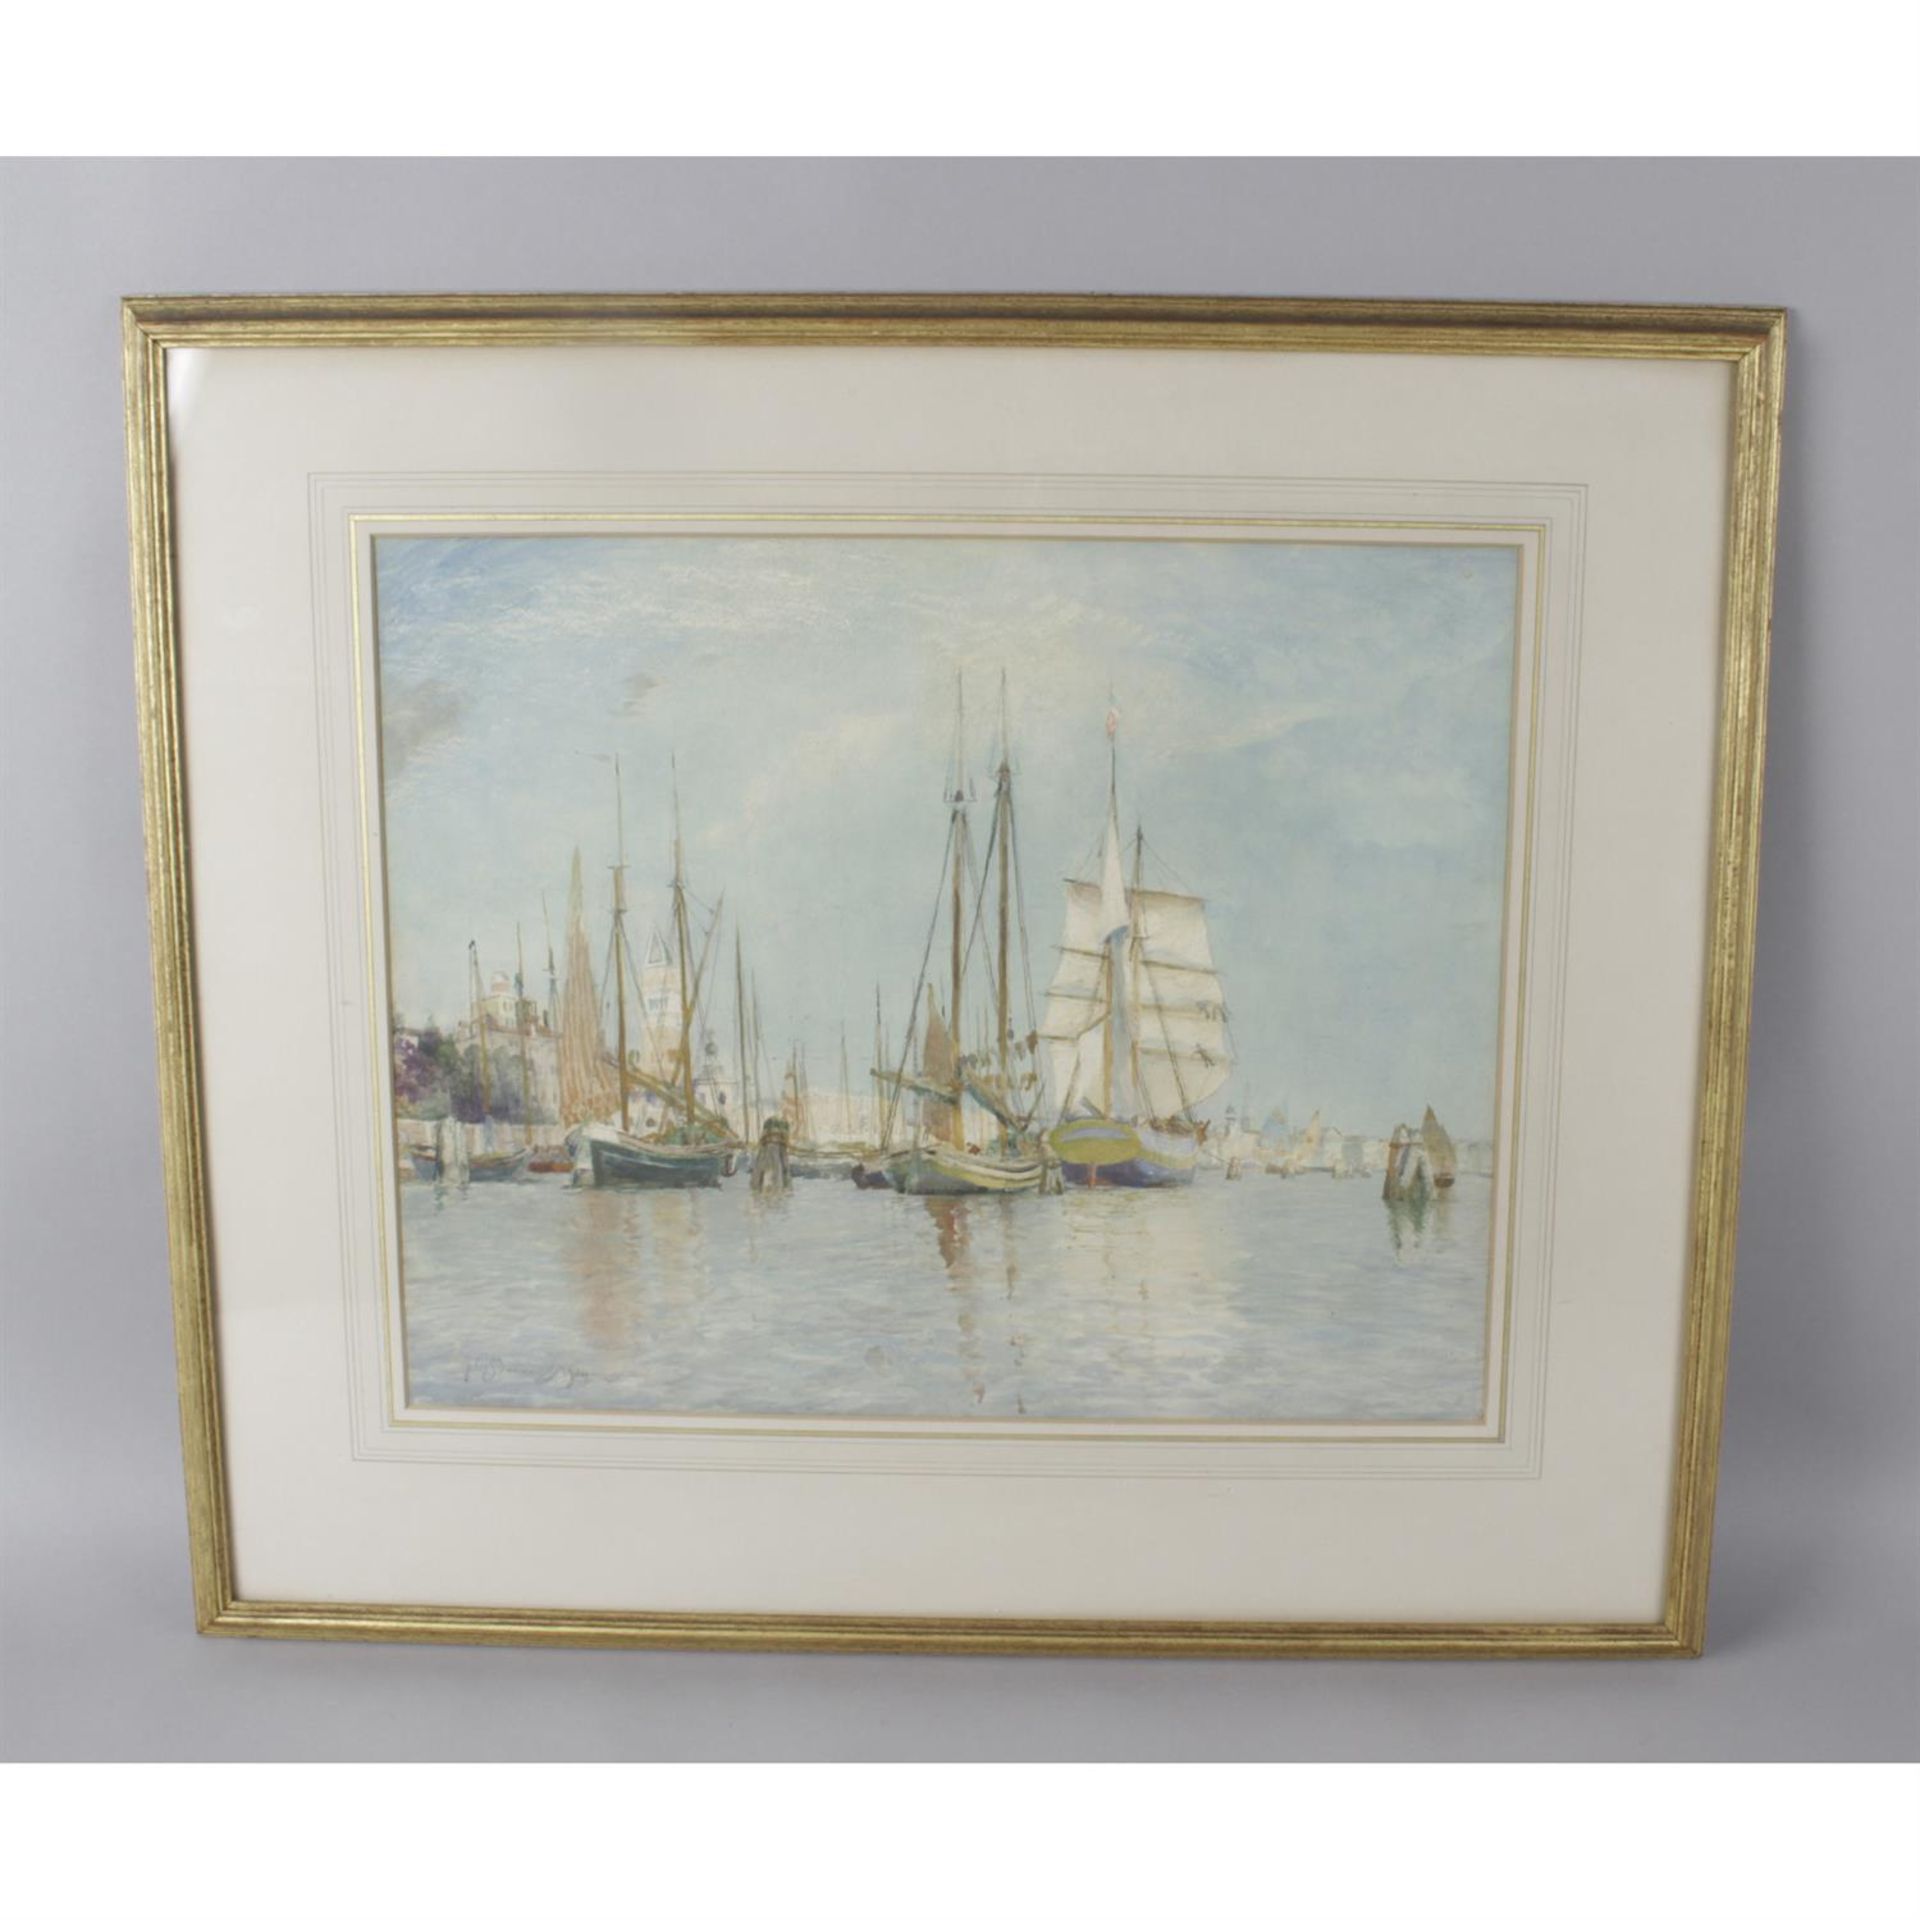 David Murray (1849 - 1933), "The Zattere - Venice", signed watercolour, dated 1914 - Image 2 of 3